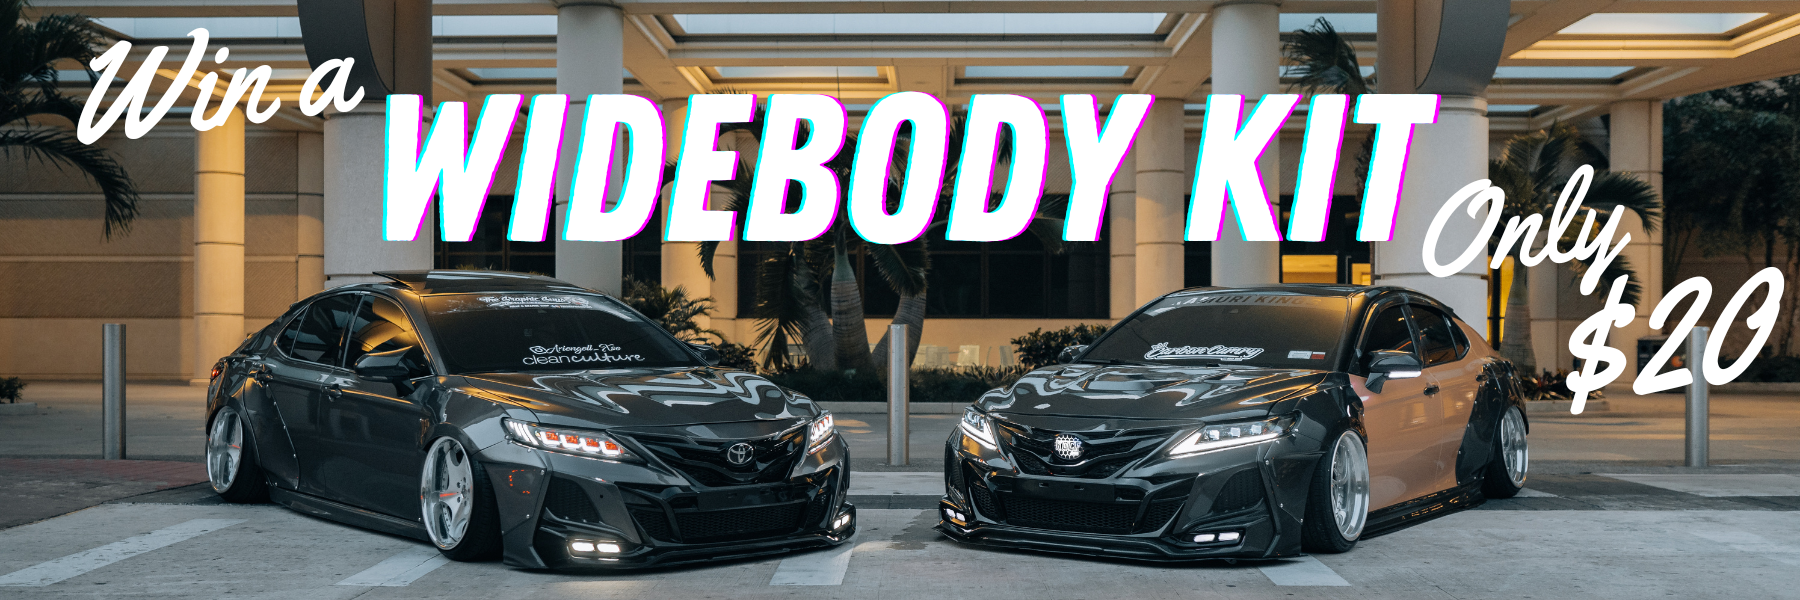 WIN A WIDEBODY KIT (1).png__PID:a47ce3ed-daad-4fdc-8541-63cced3d703c